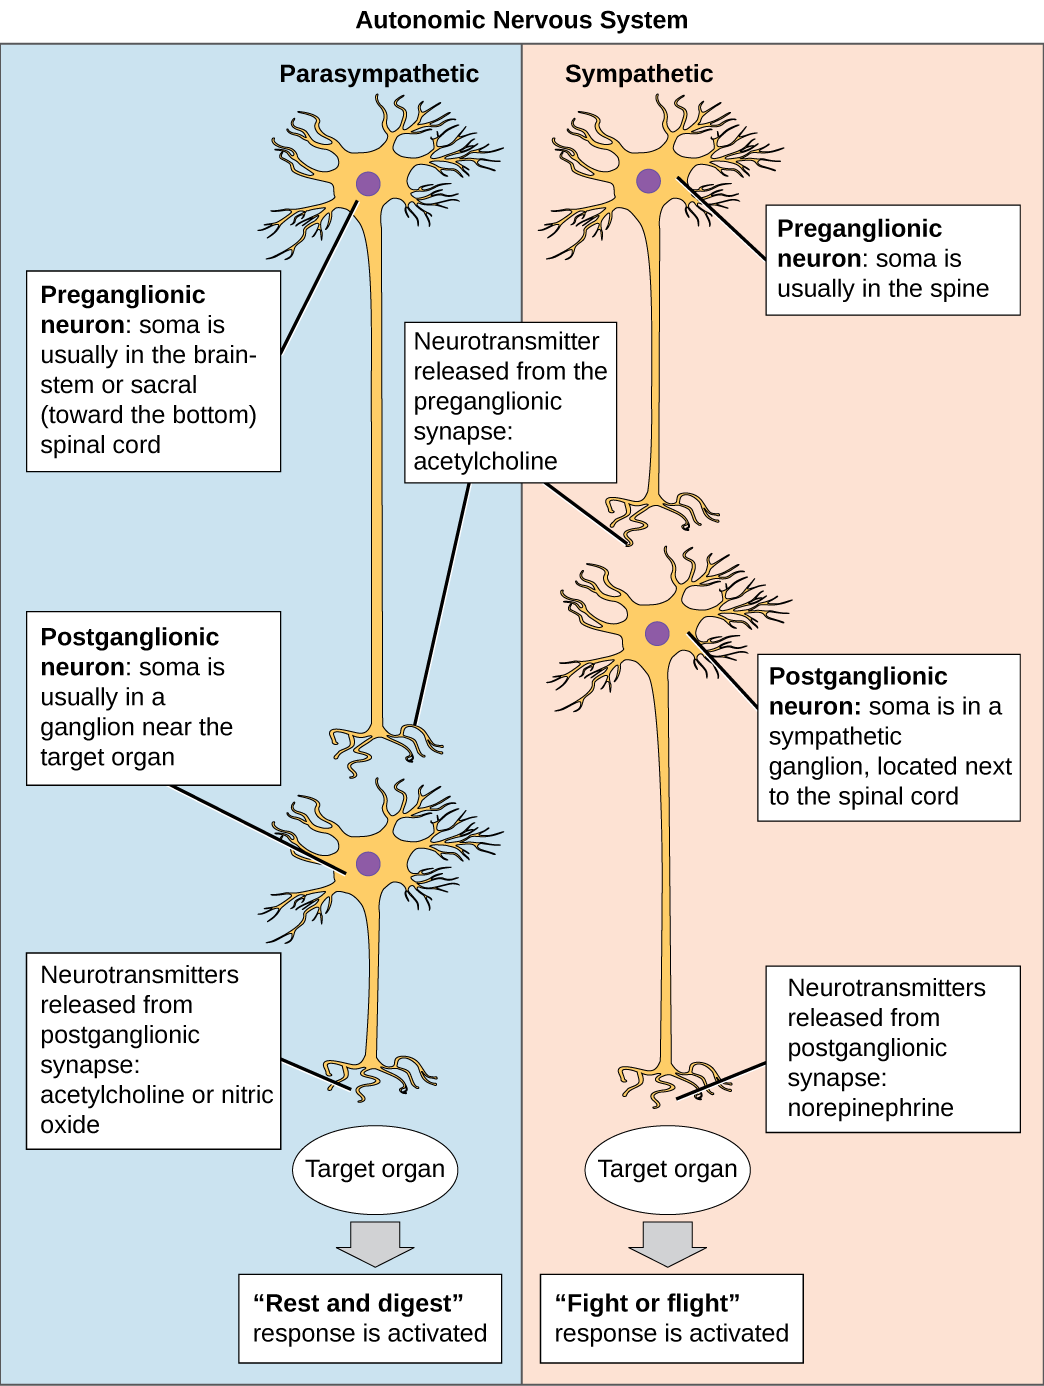 Image showing Autonomic System neurons conduct signals via the preganglionic neurons to postganglionic neurons to the target organs.